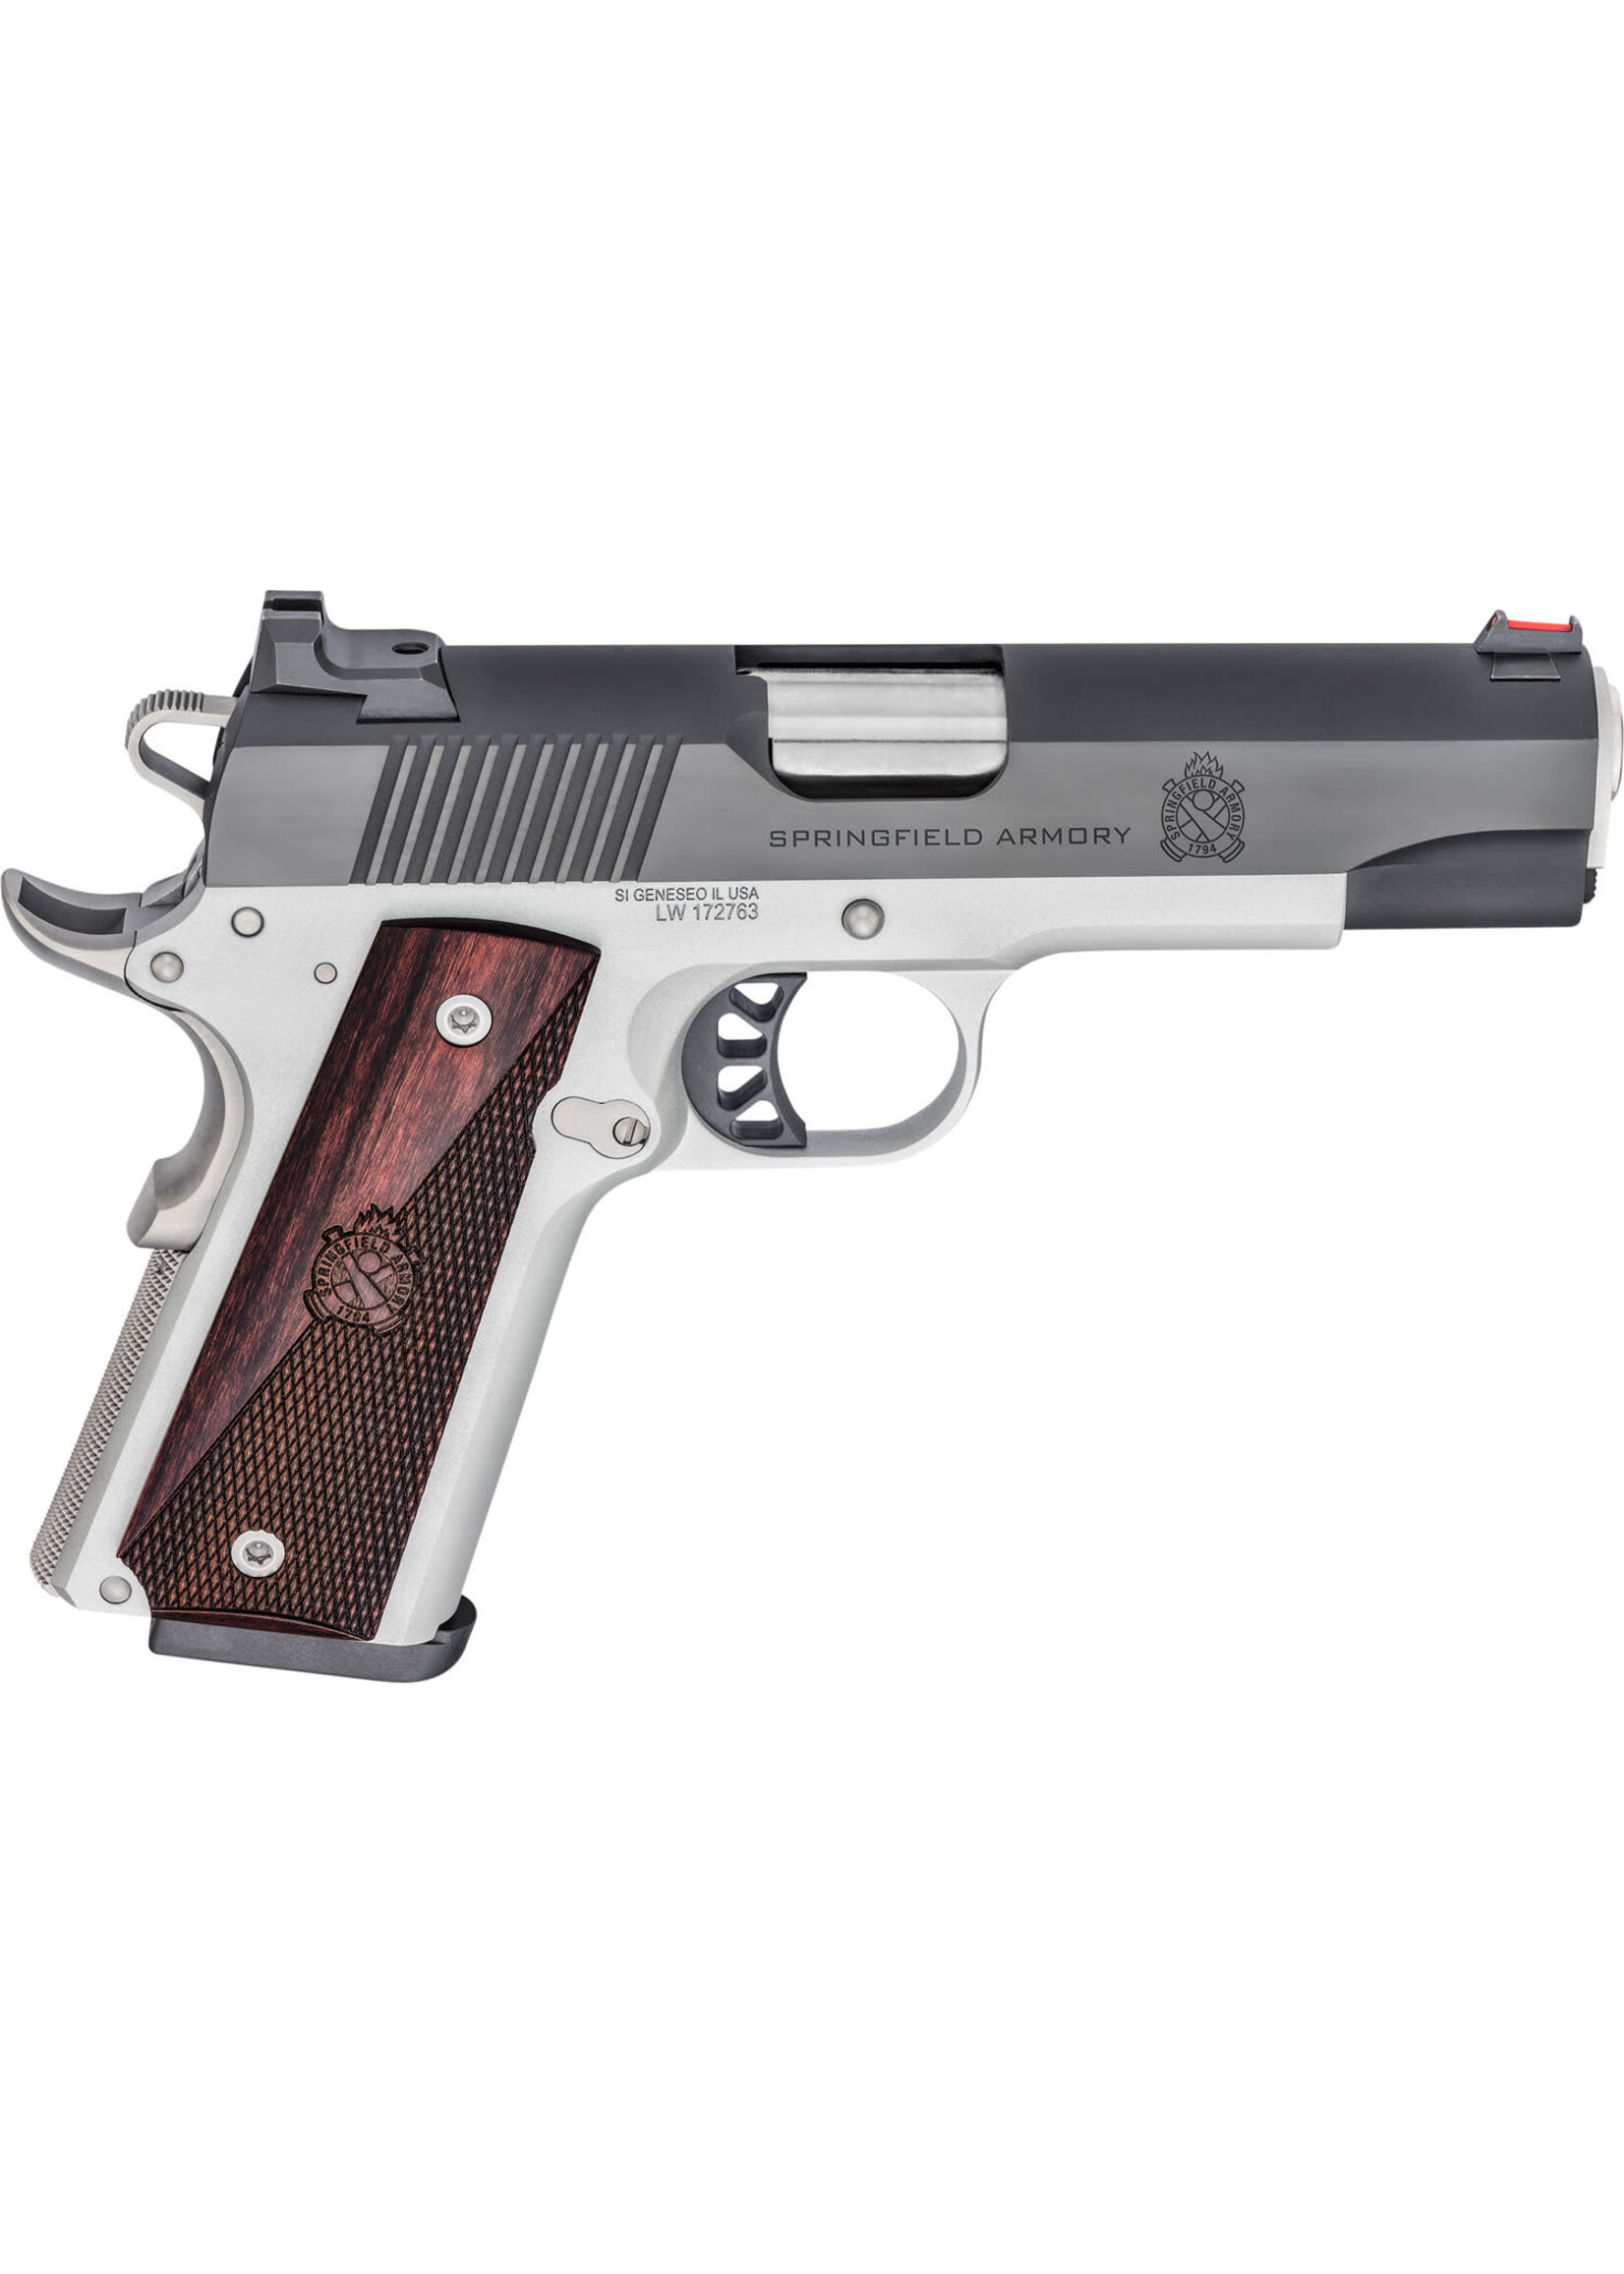 Springfield Armory Springfield Armory PX9118L 1911 Ronin 45 ACP 8+1, 4.25" Stainless Match Grade Steel Barrel, Salt Blued Serrated Carbon Steel Slide, Satin Cerakote Aluminum Frame w/Beavertail, Crossed Cannon Wood Grip, Right Hand